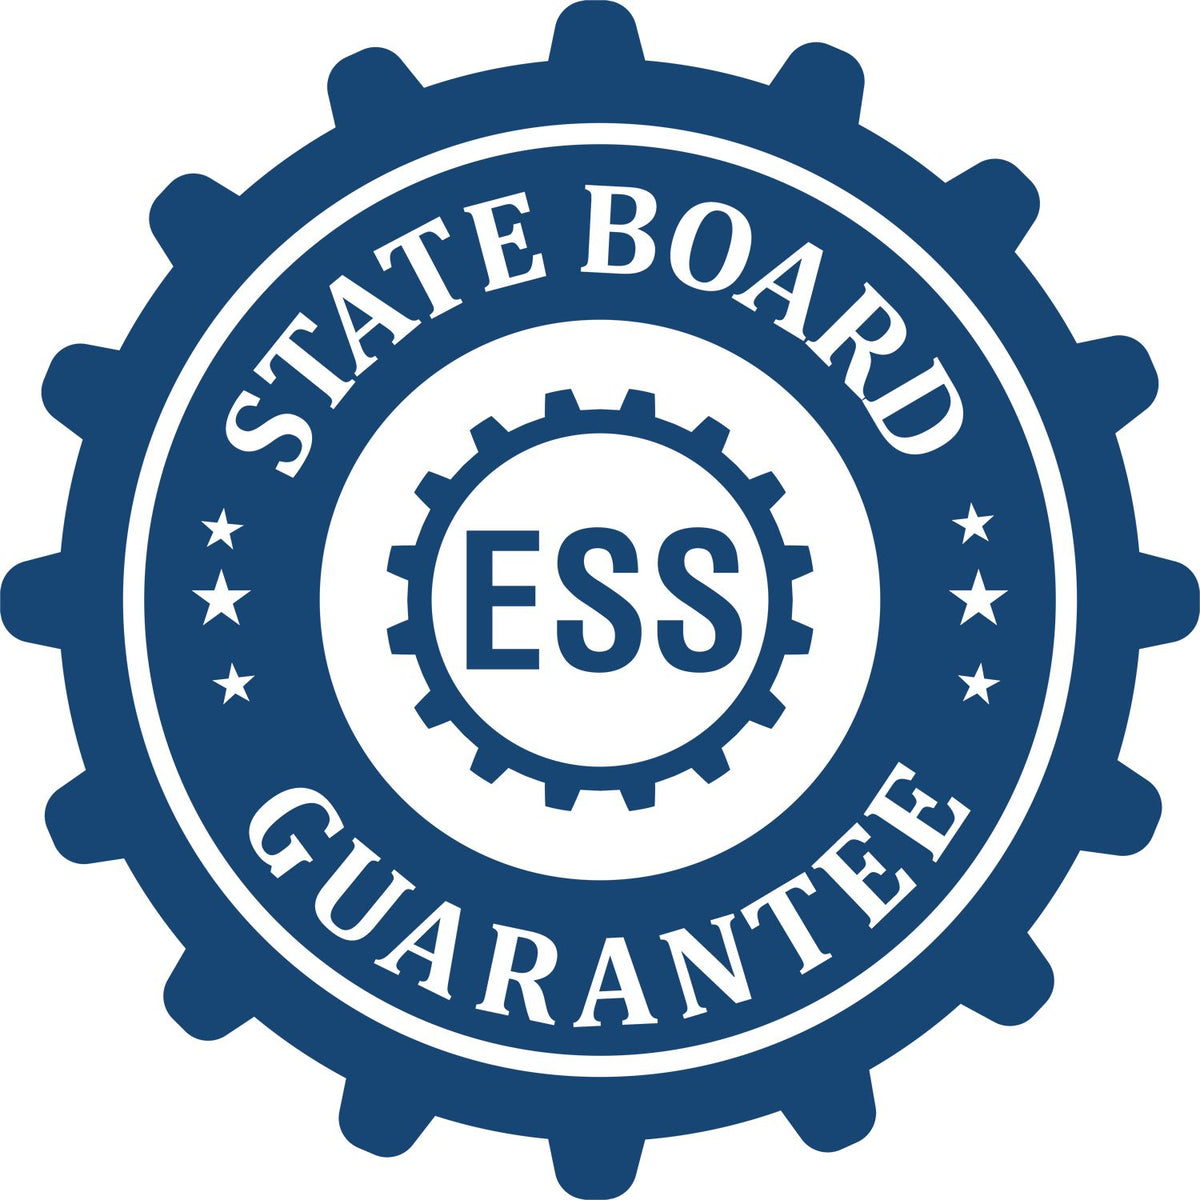 An emblem in a gear shape illustrating a state board guarantee for the Premium MaxLight Pre-Inked Minnesota Engineering Stamp product.